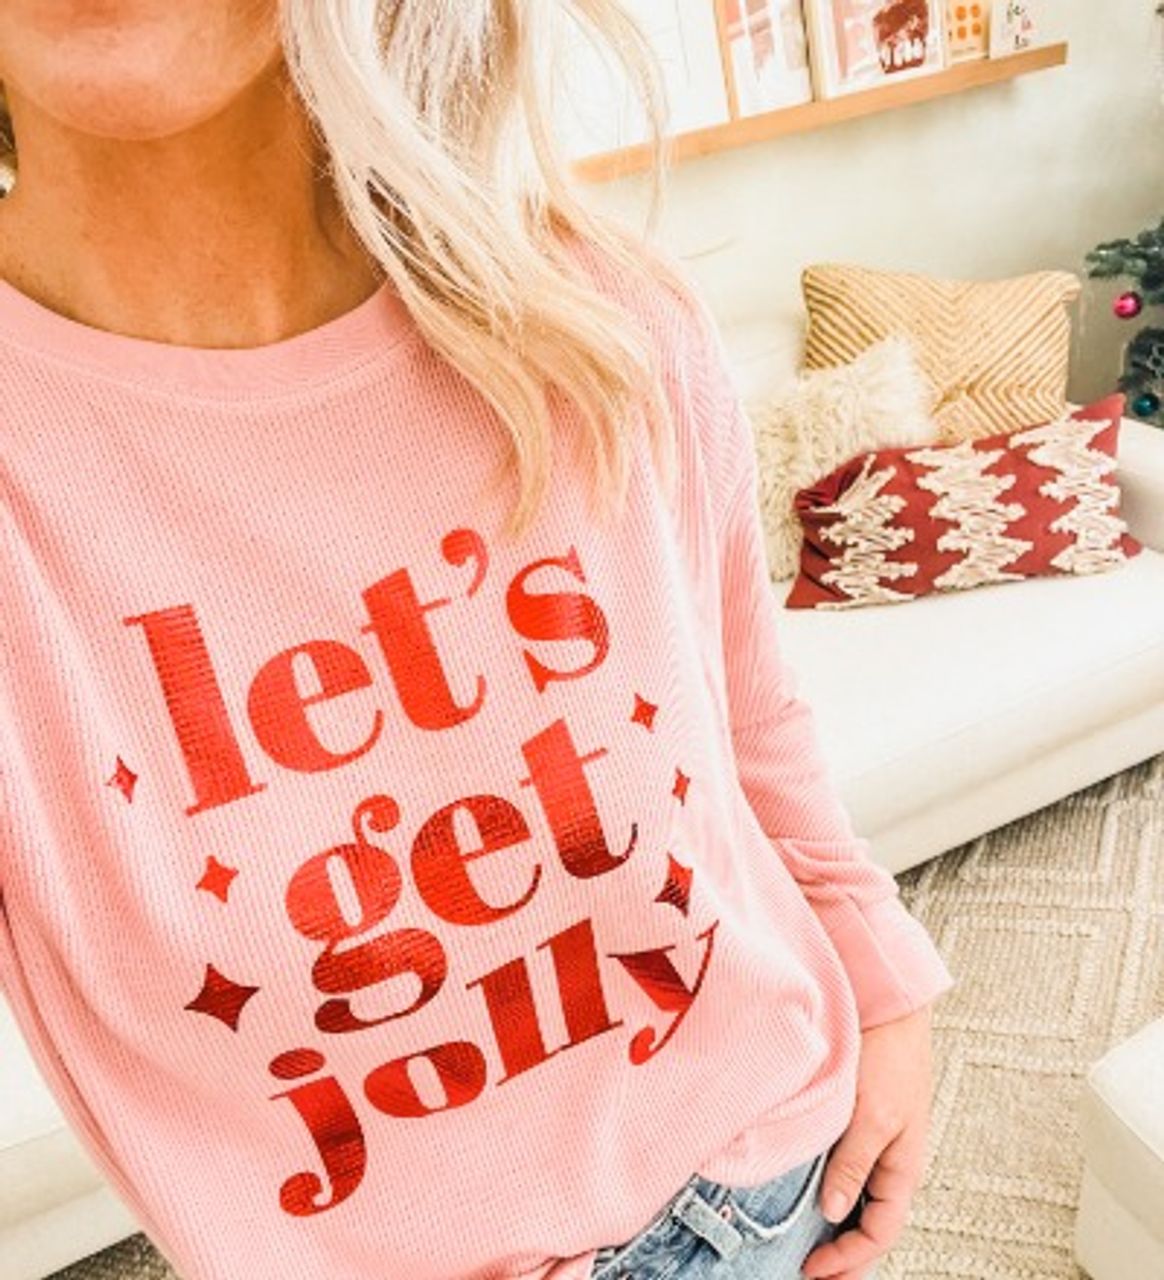 Let's Get Jolly Holiday Shirt